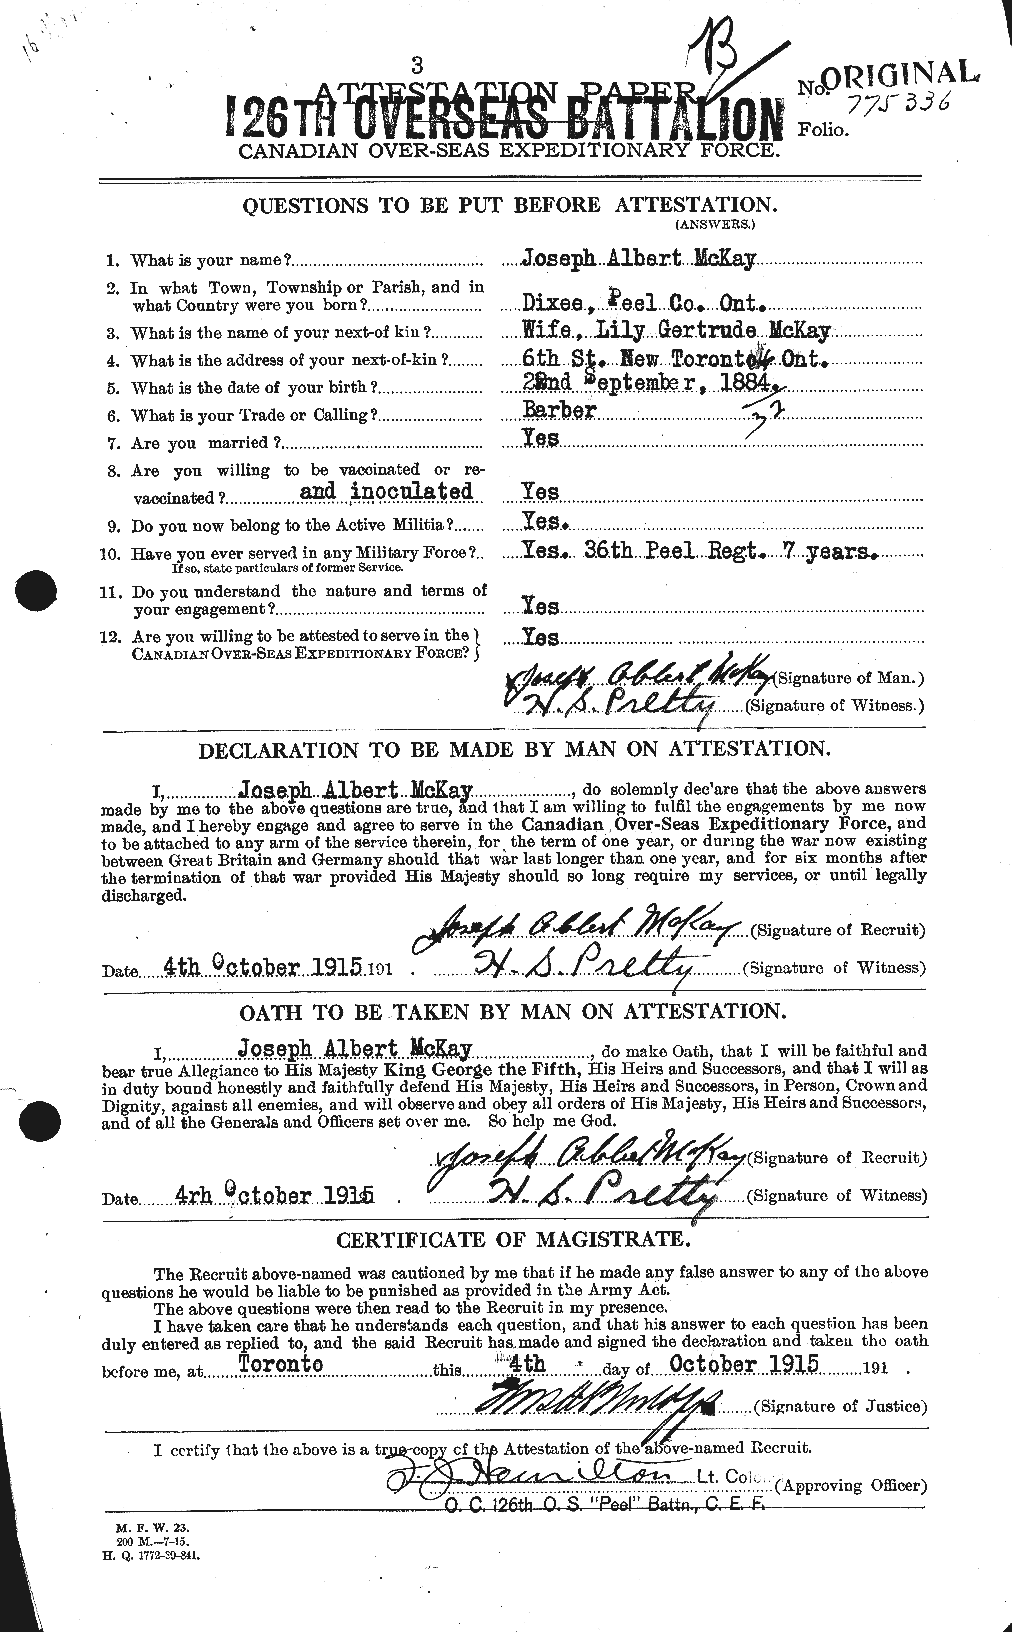 Personnel Records of the First World War - CEF 527111a